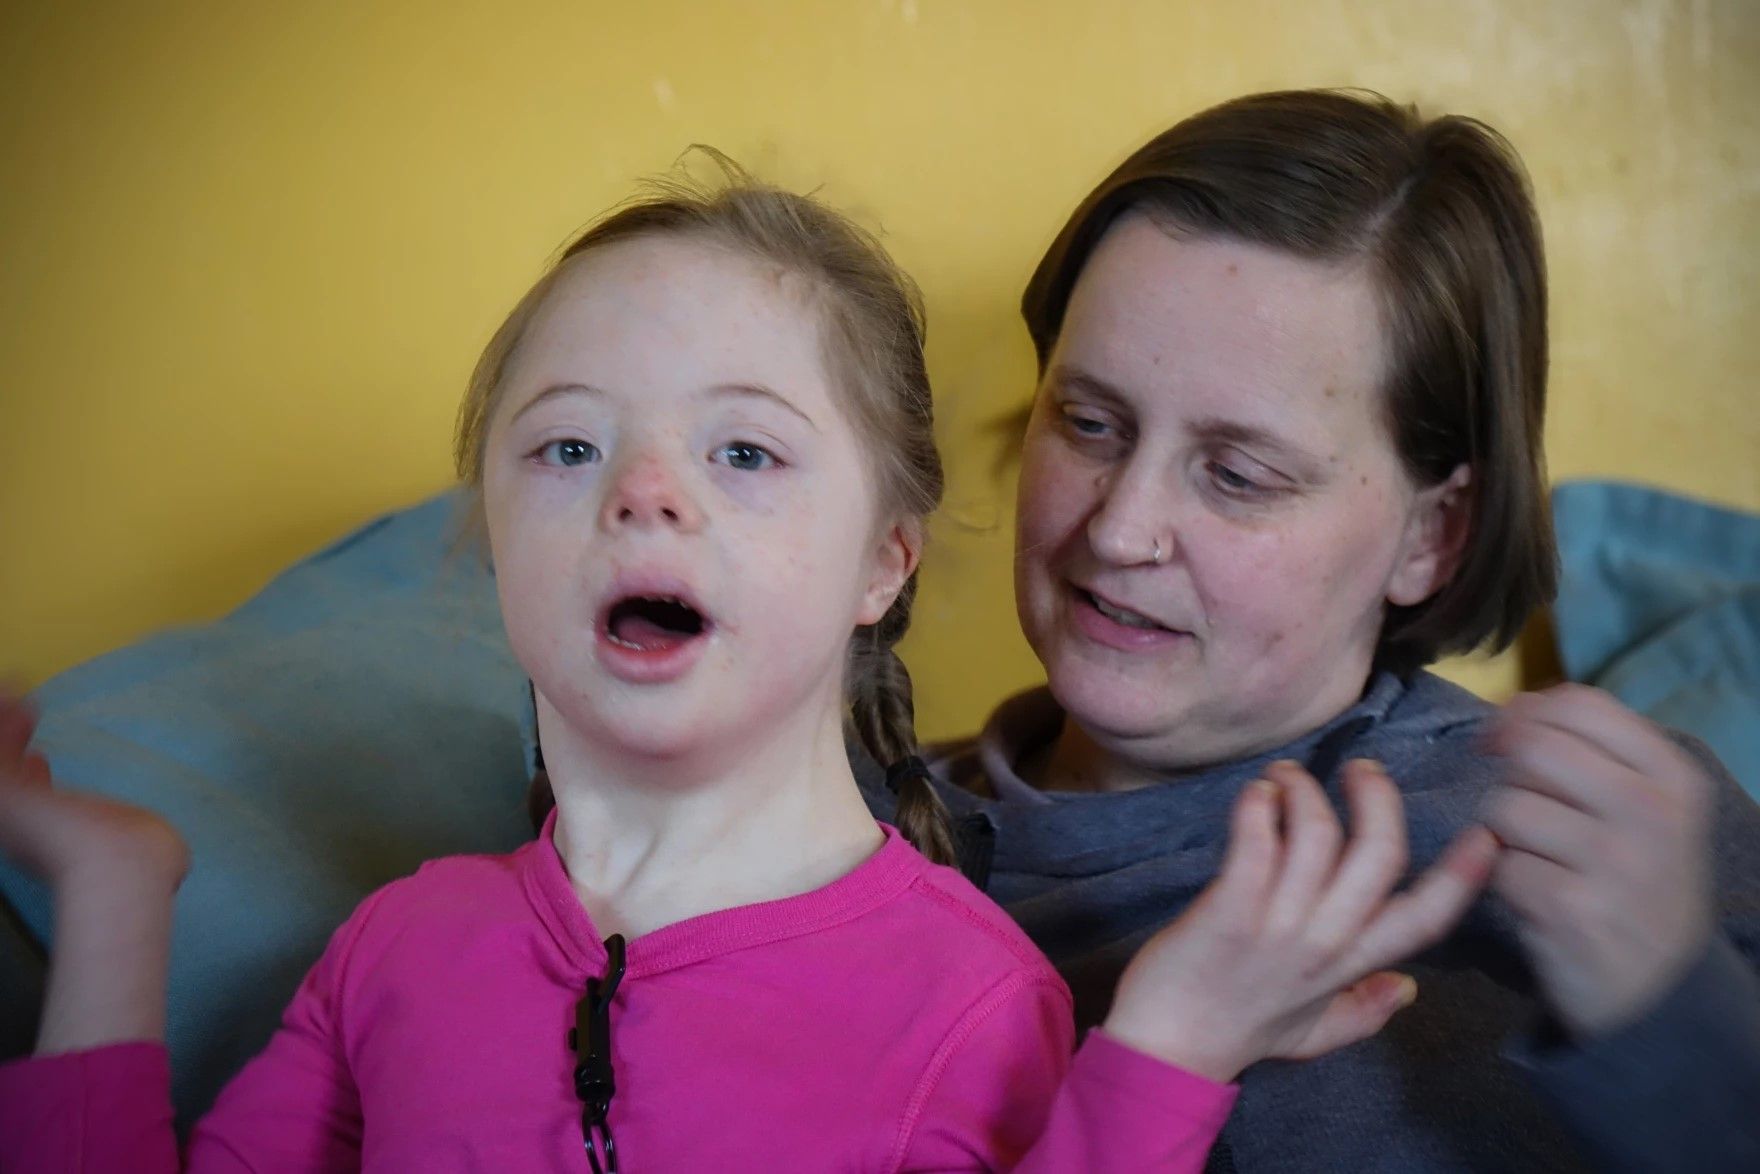 During the Medicaid unwinding, Andrea Mae and her three children lost their coverage despite being eligible. Her middle daughter, Shilo, is on a special kind of Medicaid for the aged and disabled.